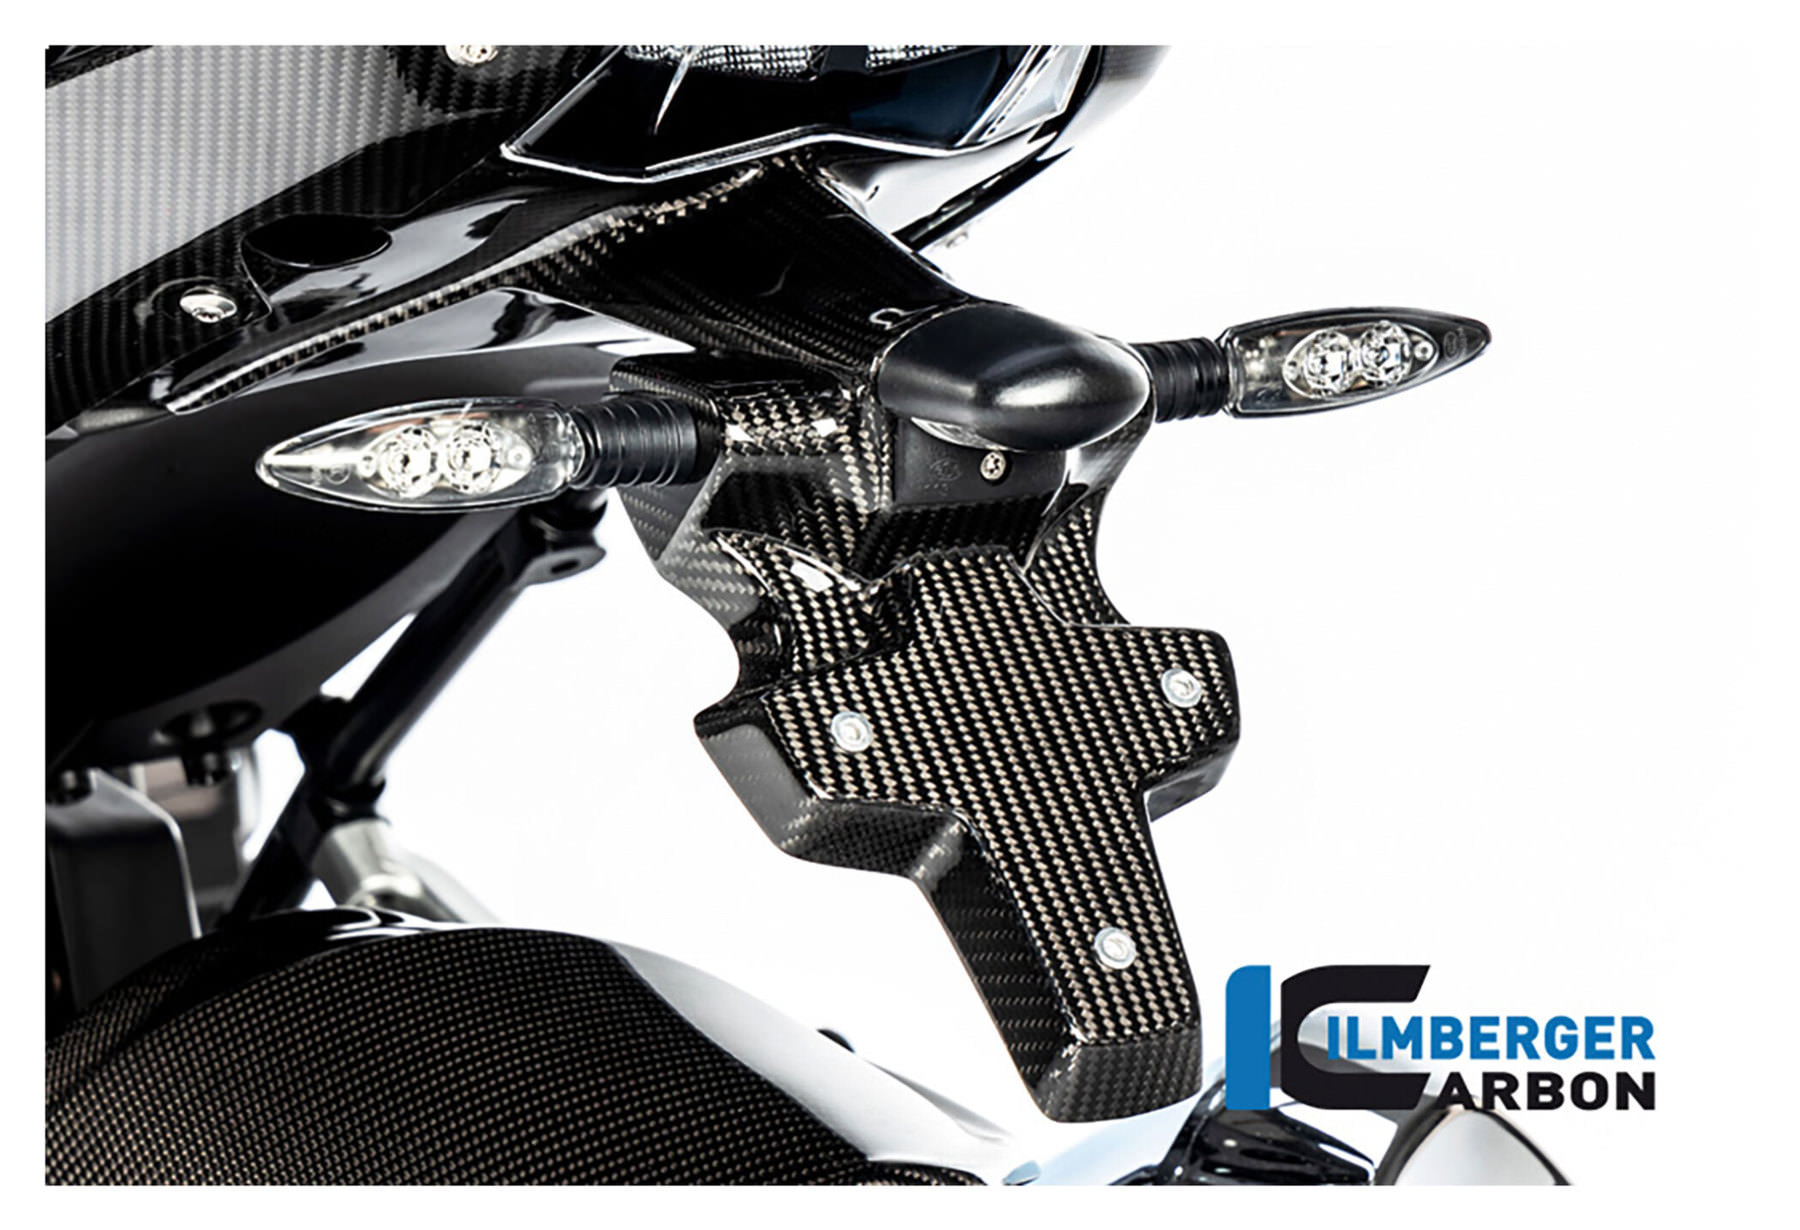 Buy Carbon parts for BMW R1250 R/RS 19 Louis motorcycle